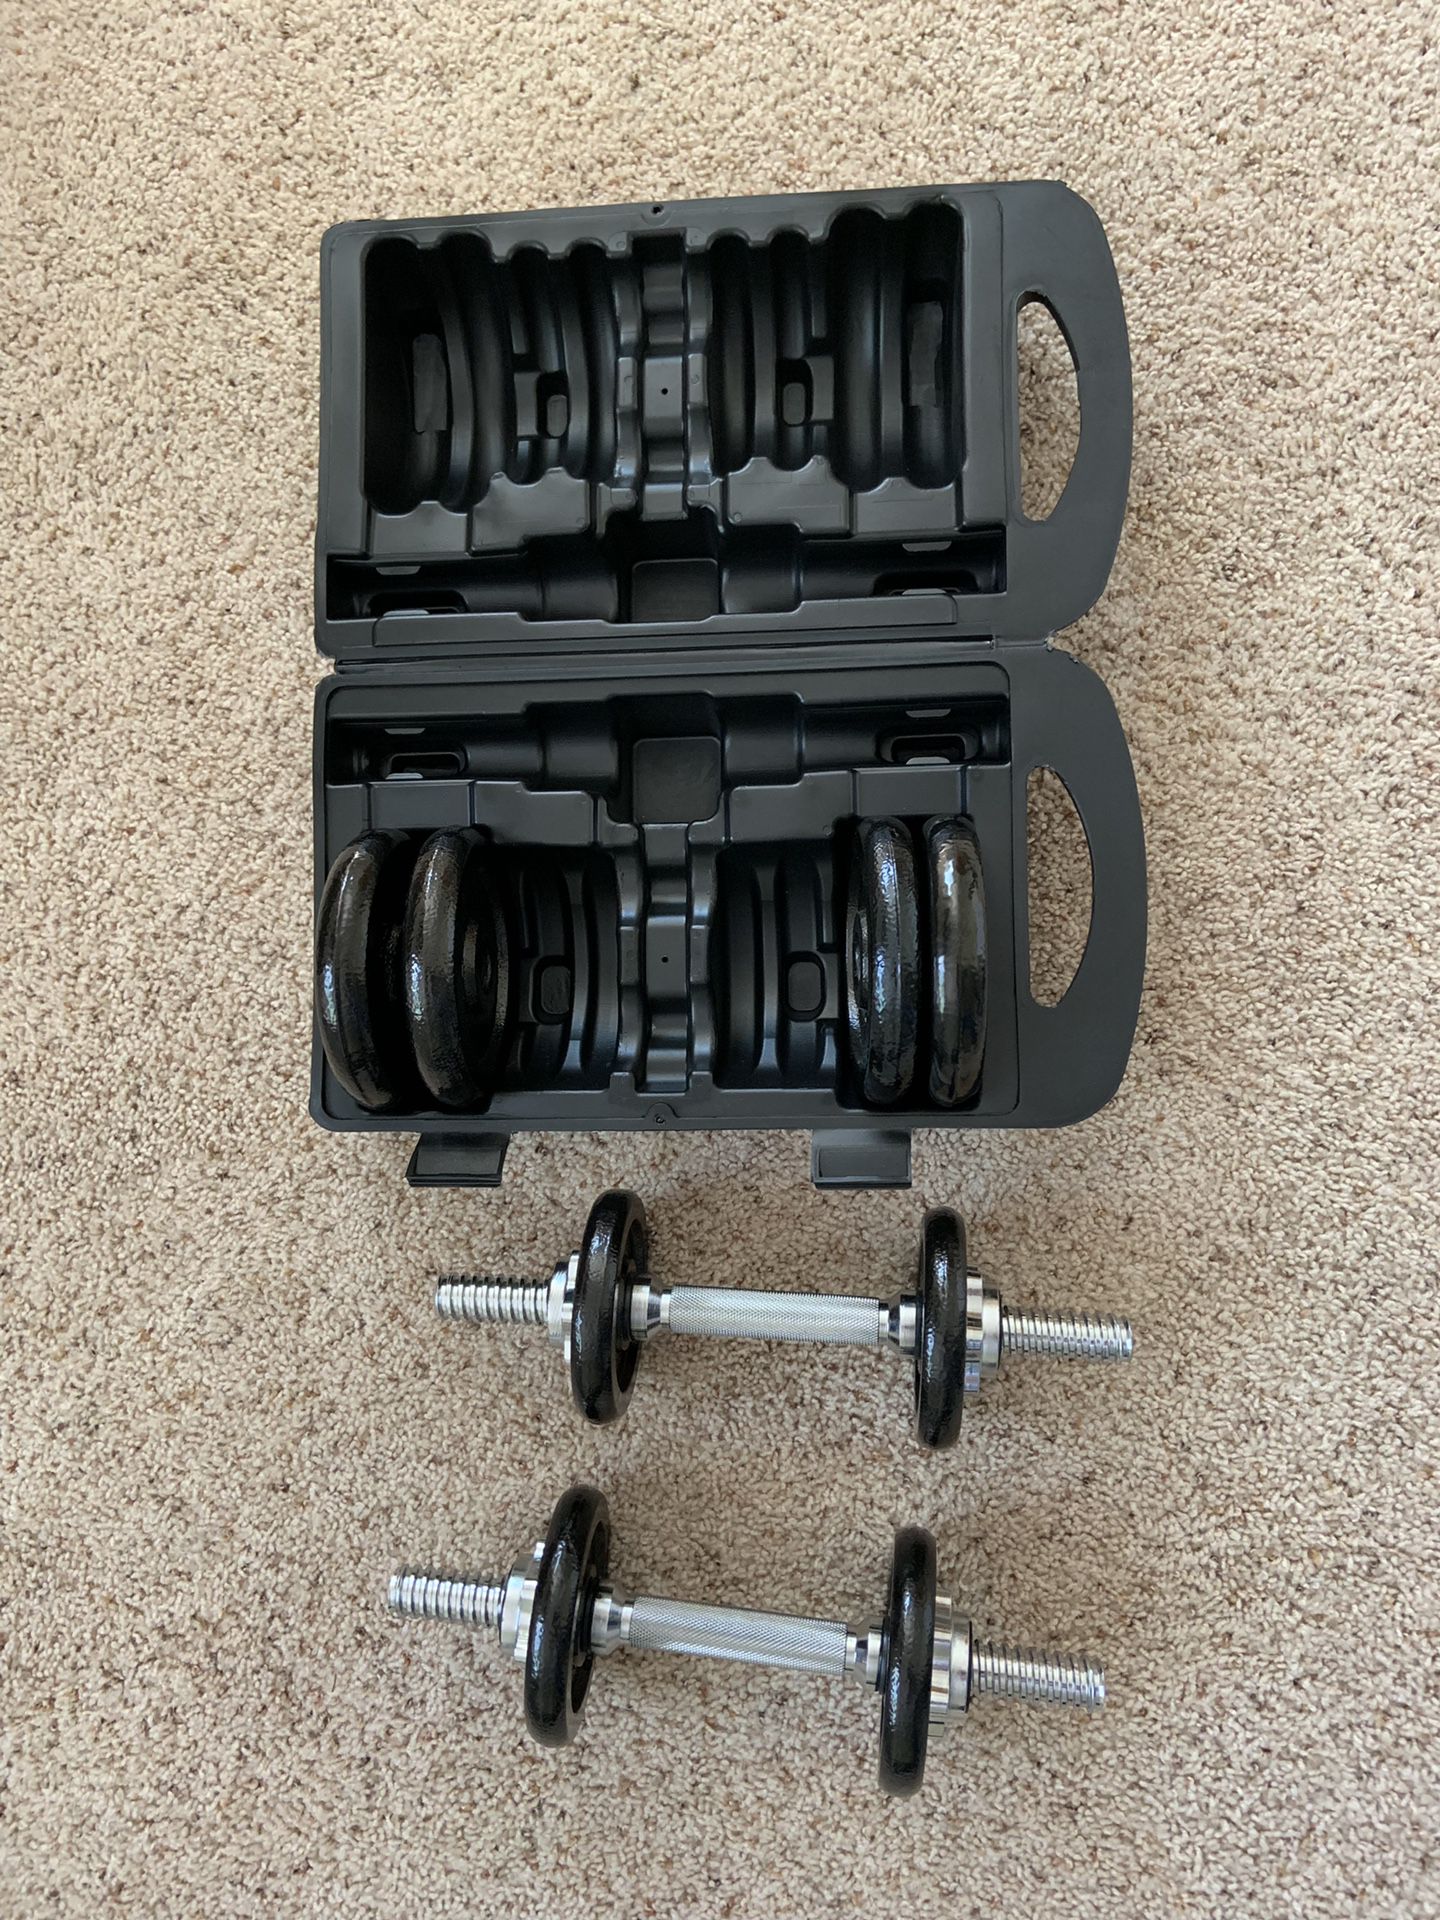 Adjustable barbell lifting dumbells weight set with case